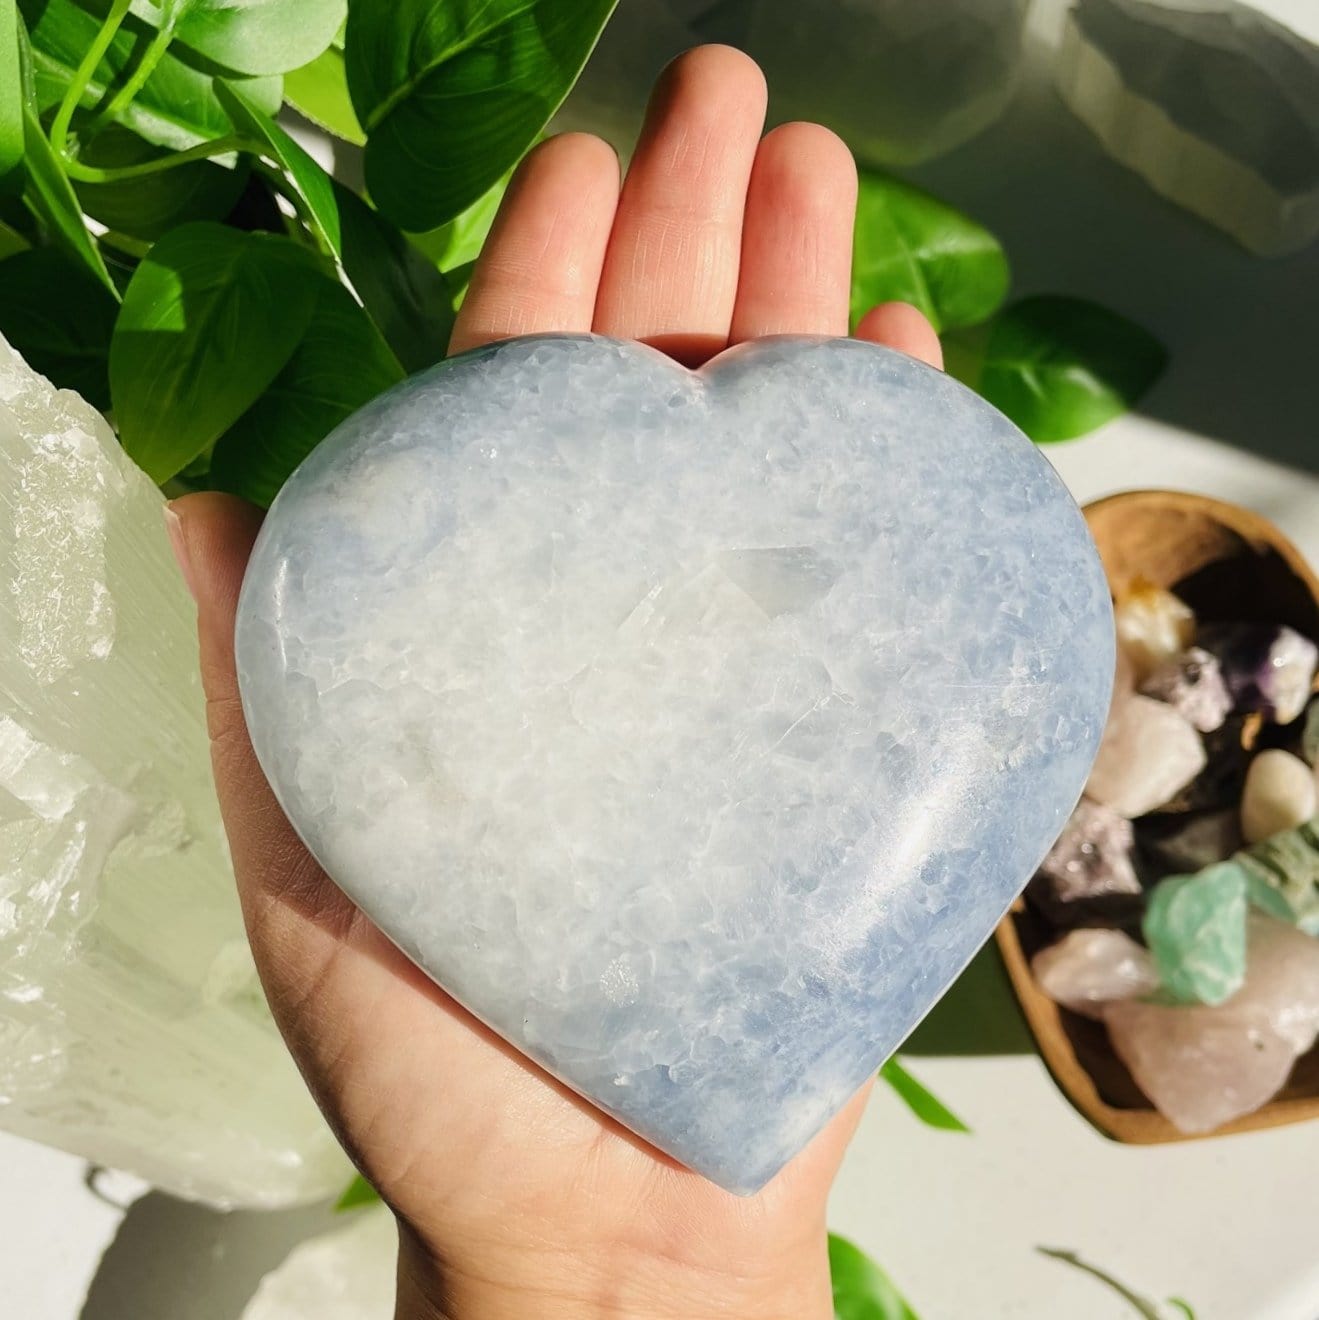 Blue Calcite Heart in a hand for size reference